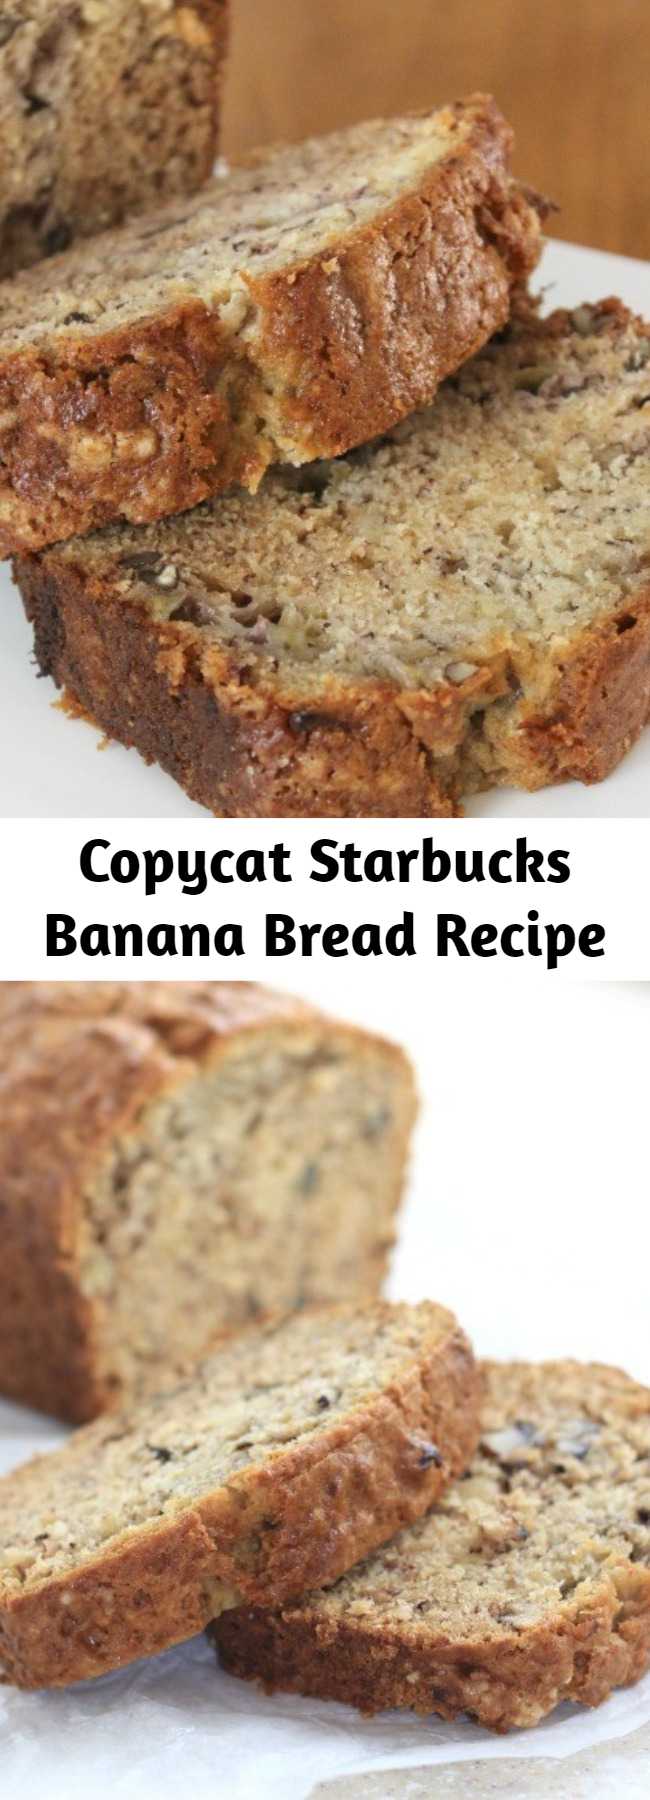 Copycat Starbucks Banana Bread Recipe - This recipe is actually from Starbucks directly so hopefully you like it as much as we do! This one is simple to make, packed with banana and is delicious plain, with nuts or add some chocolate chips for a real treat.